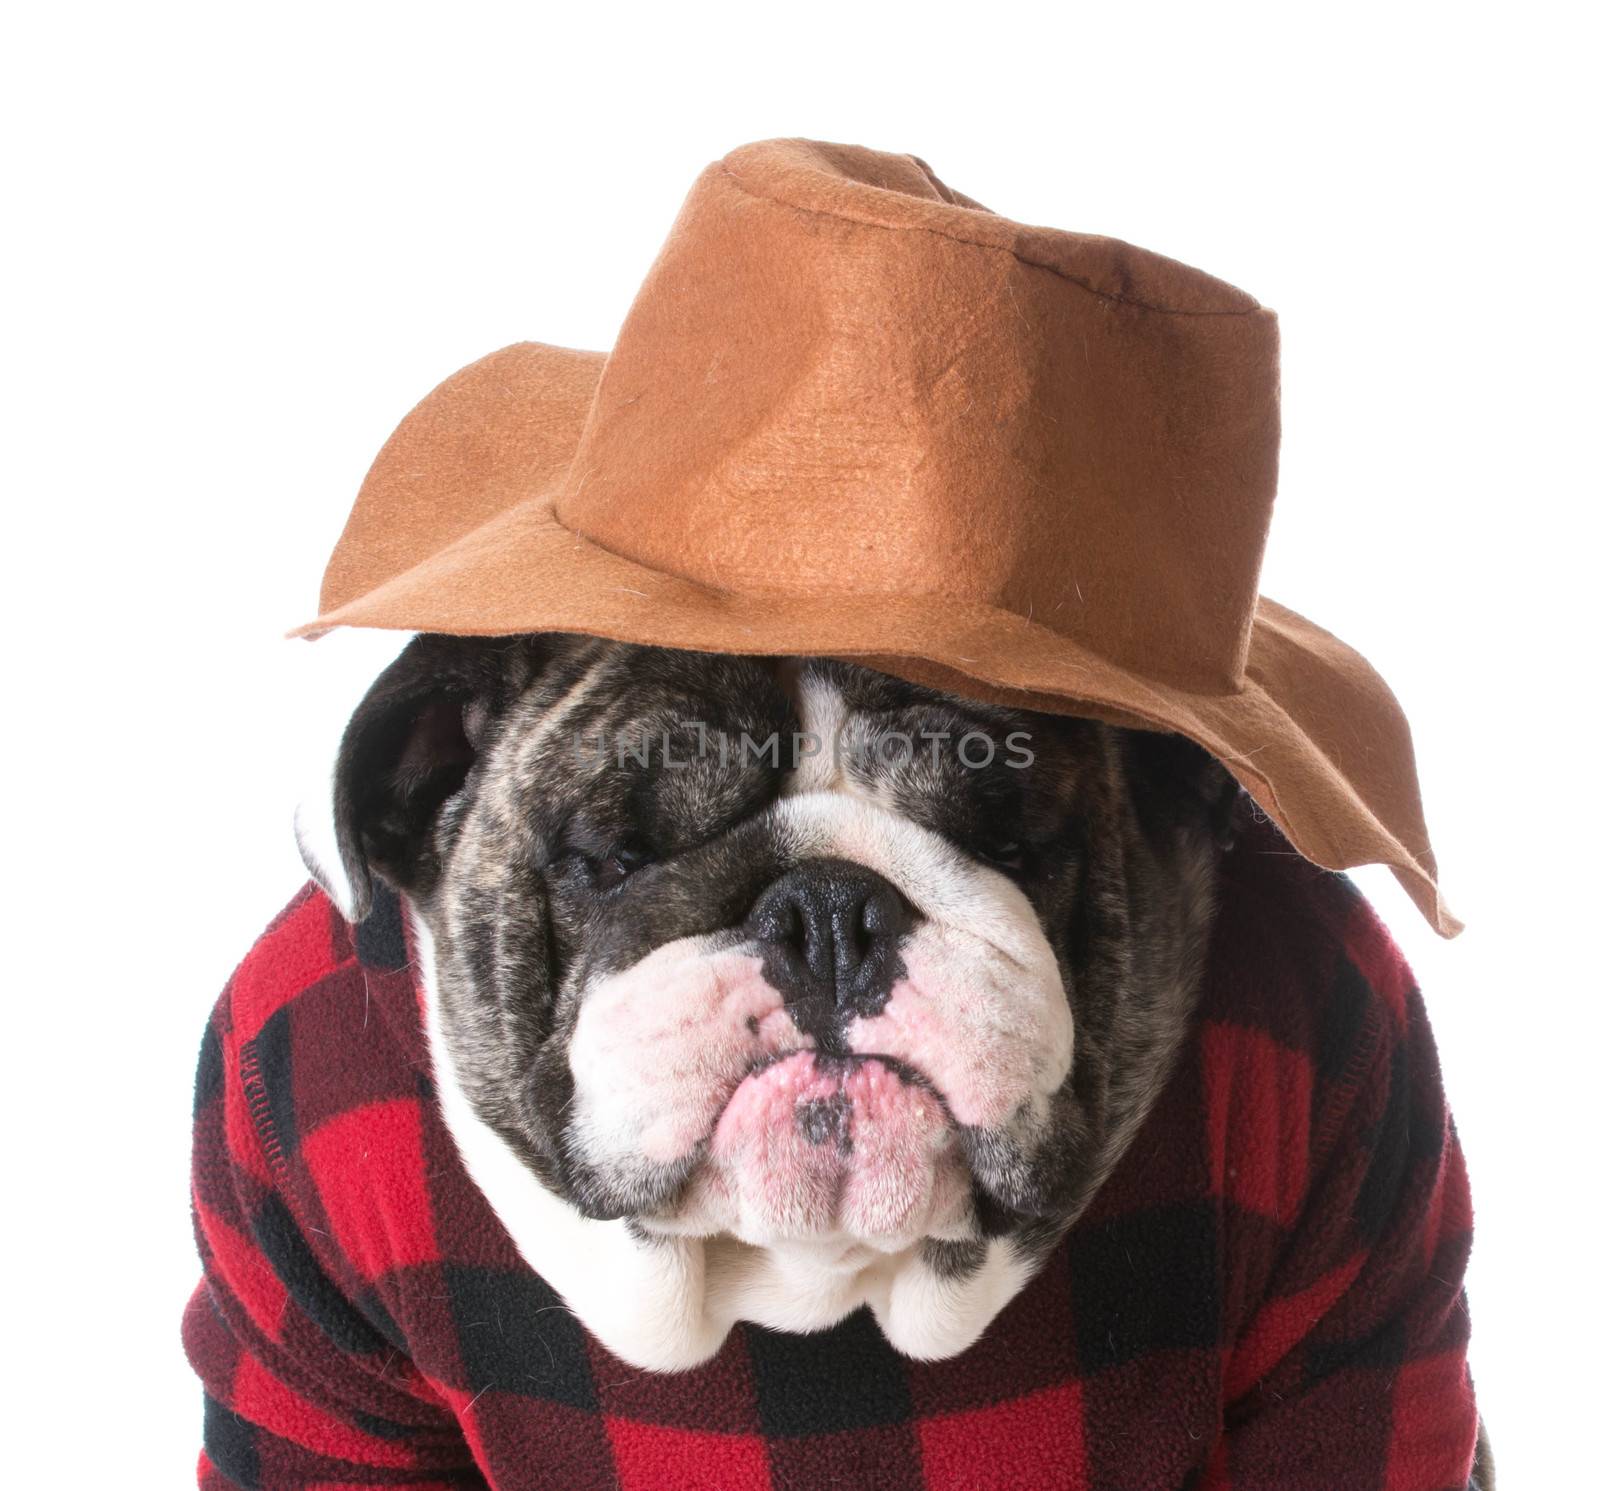 country dog - dog humanized with western hat and sweater - bulldog